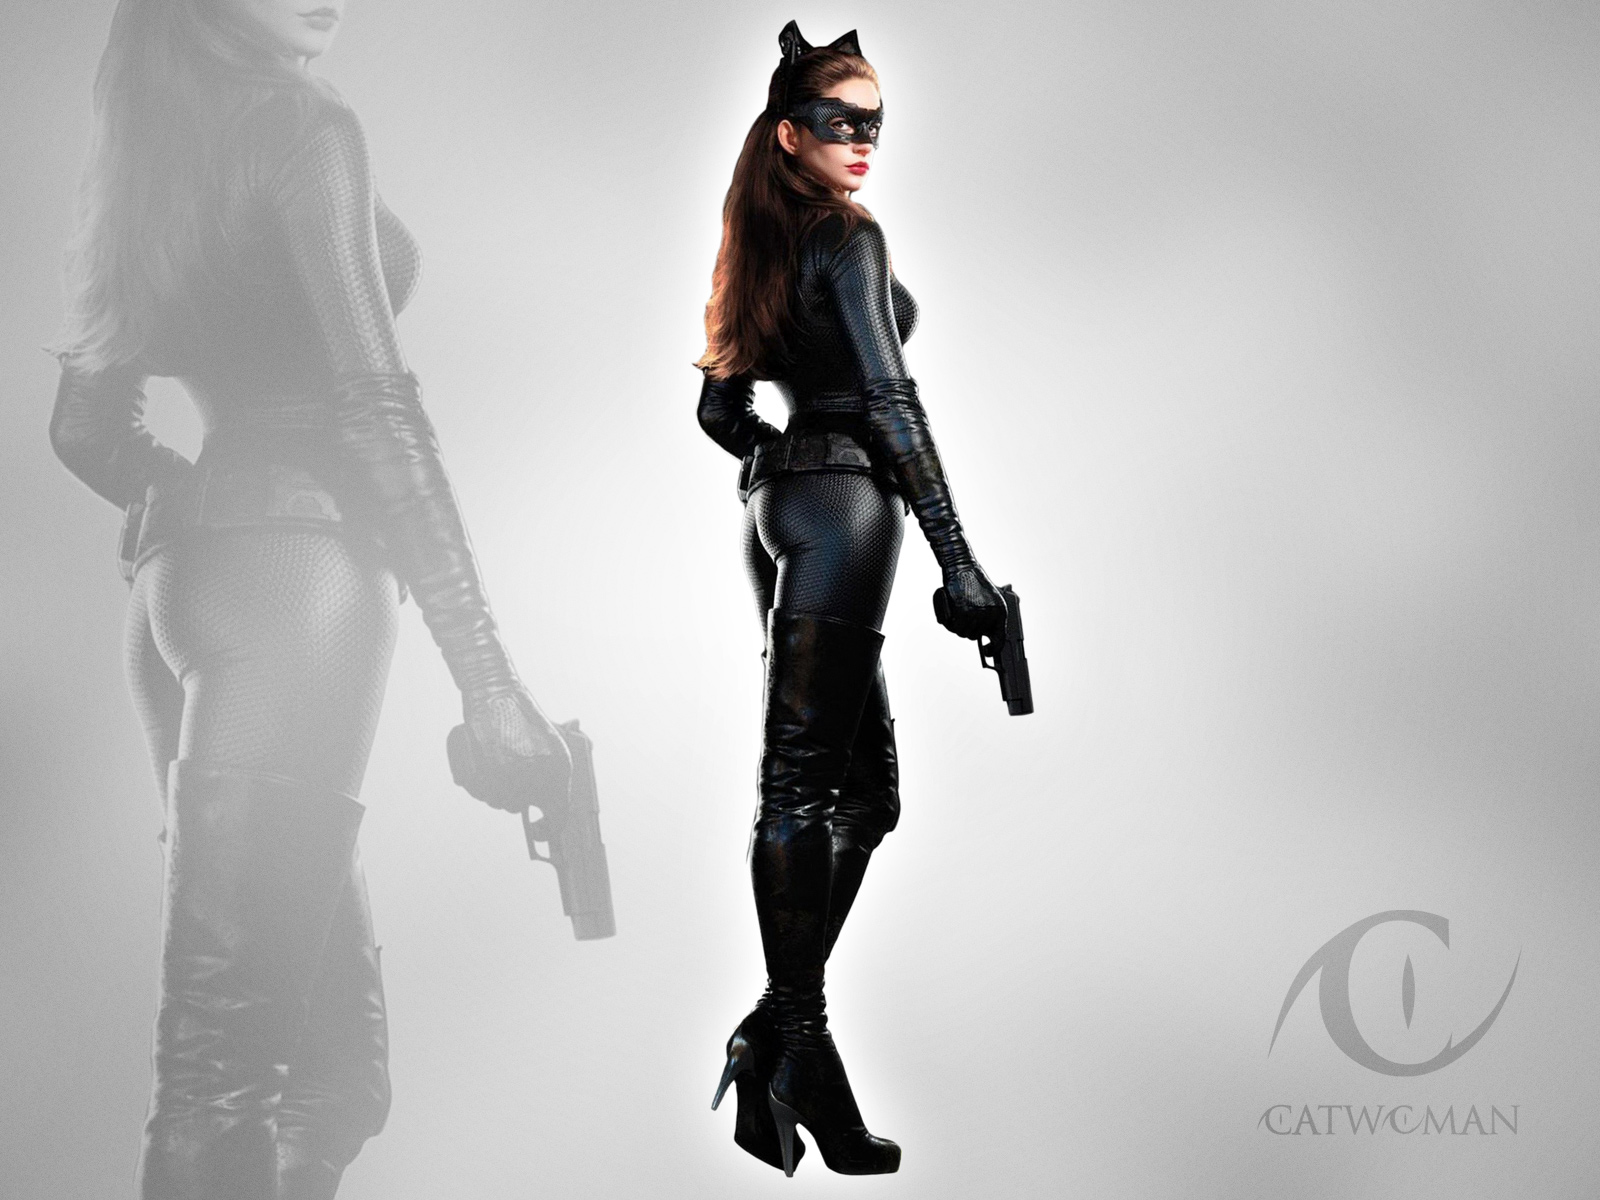 Free Download Anne Hathaway Catwoman Costume Images Pictures Findpik X For Your